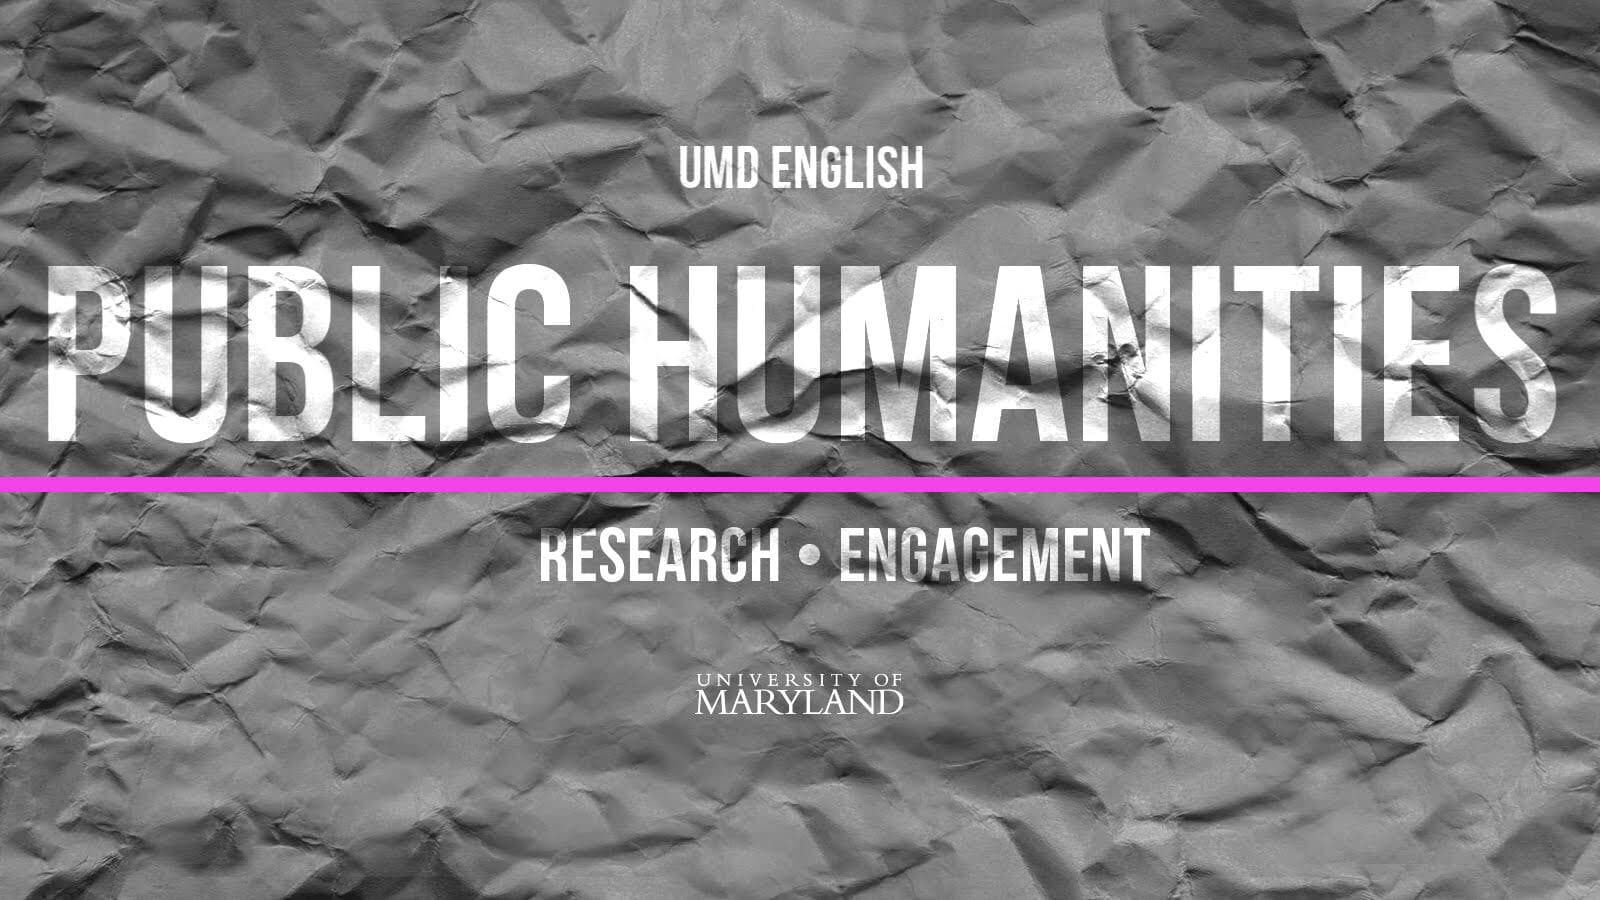 Graphic design with gray background and white text that reads: UMD English Public Humanities: Research + Engagement